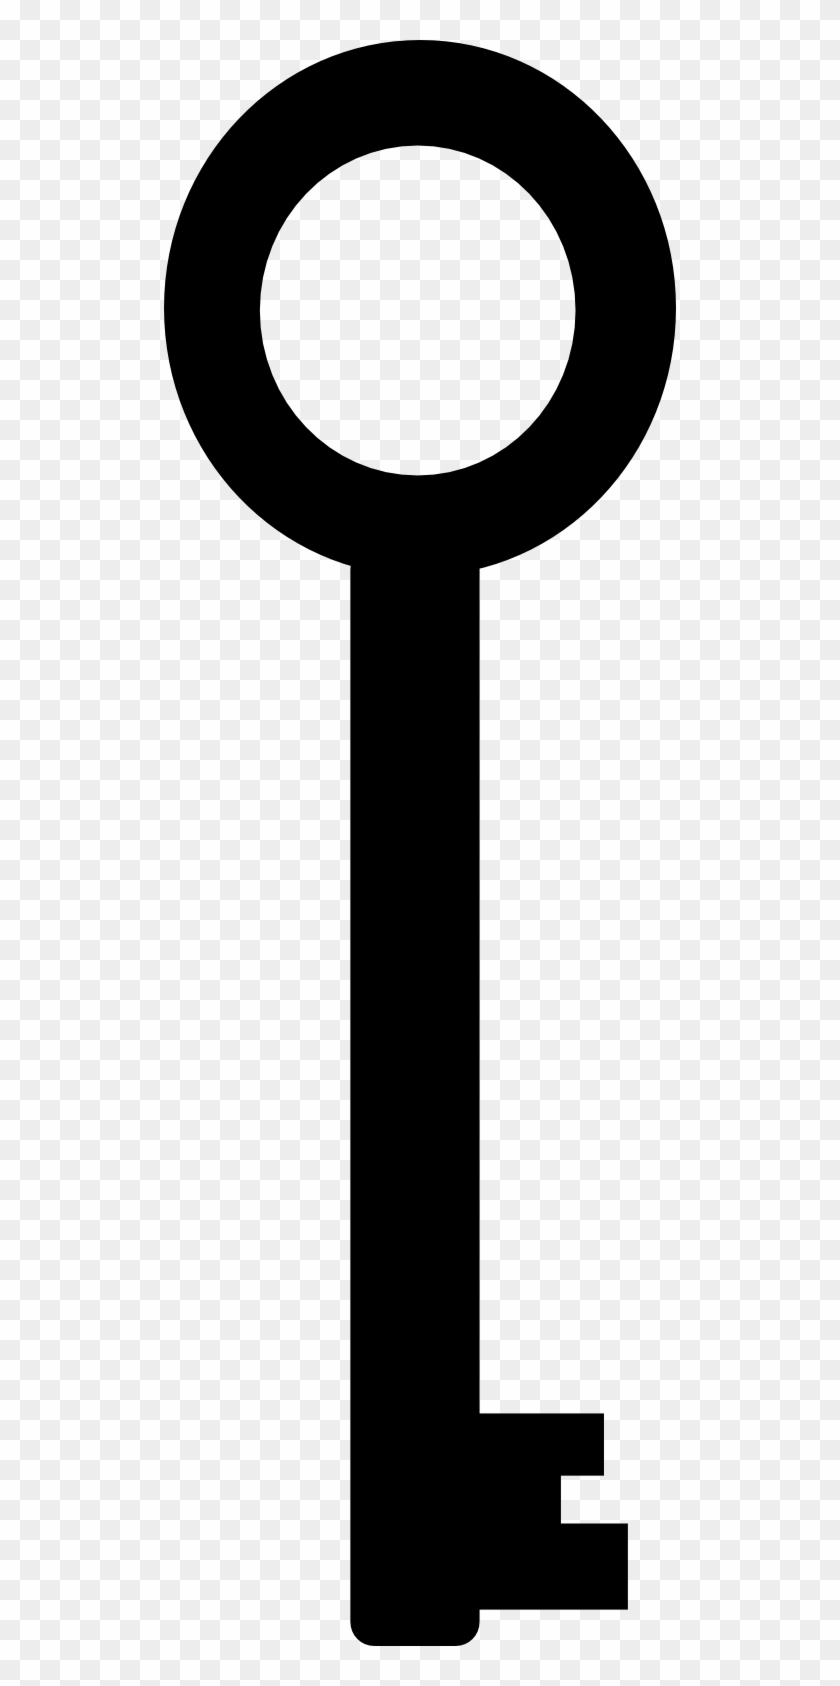 Key Clip Art For Real Estate Free Clipart Images - Key Vector #10313